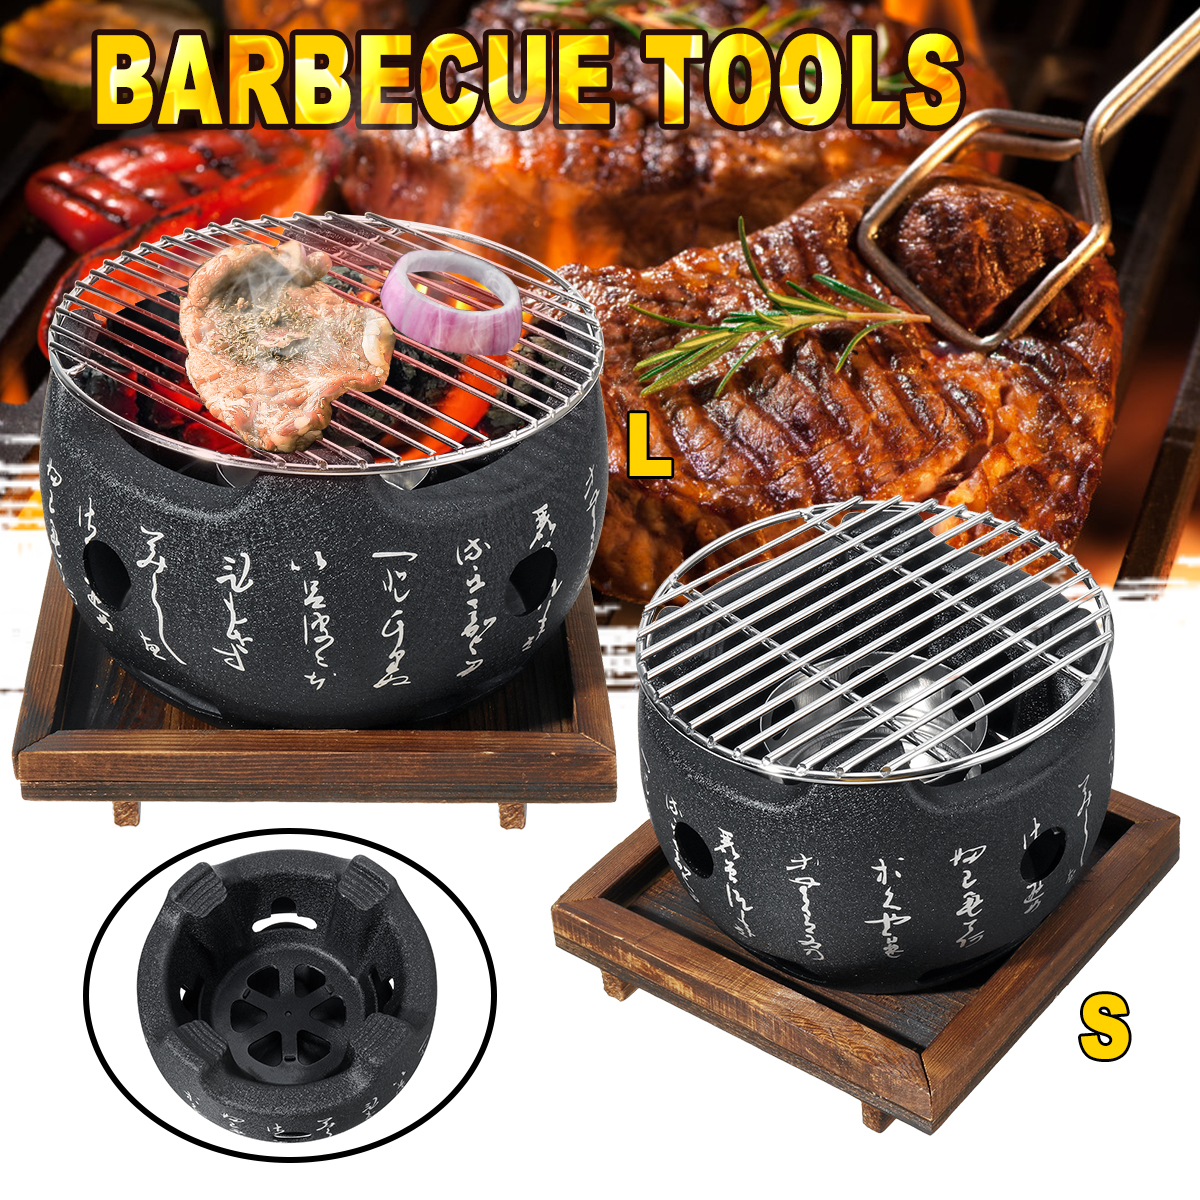 Korean Japanese Style BBQ Grill Charcoal Grill Aluminium Alloy Portable Barbecue Tools - image 3 of 15